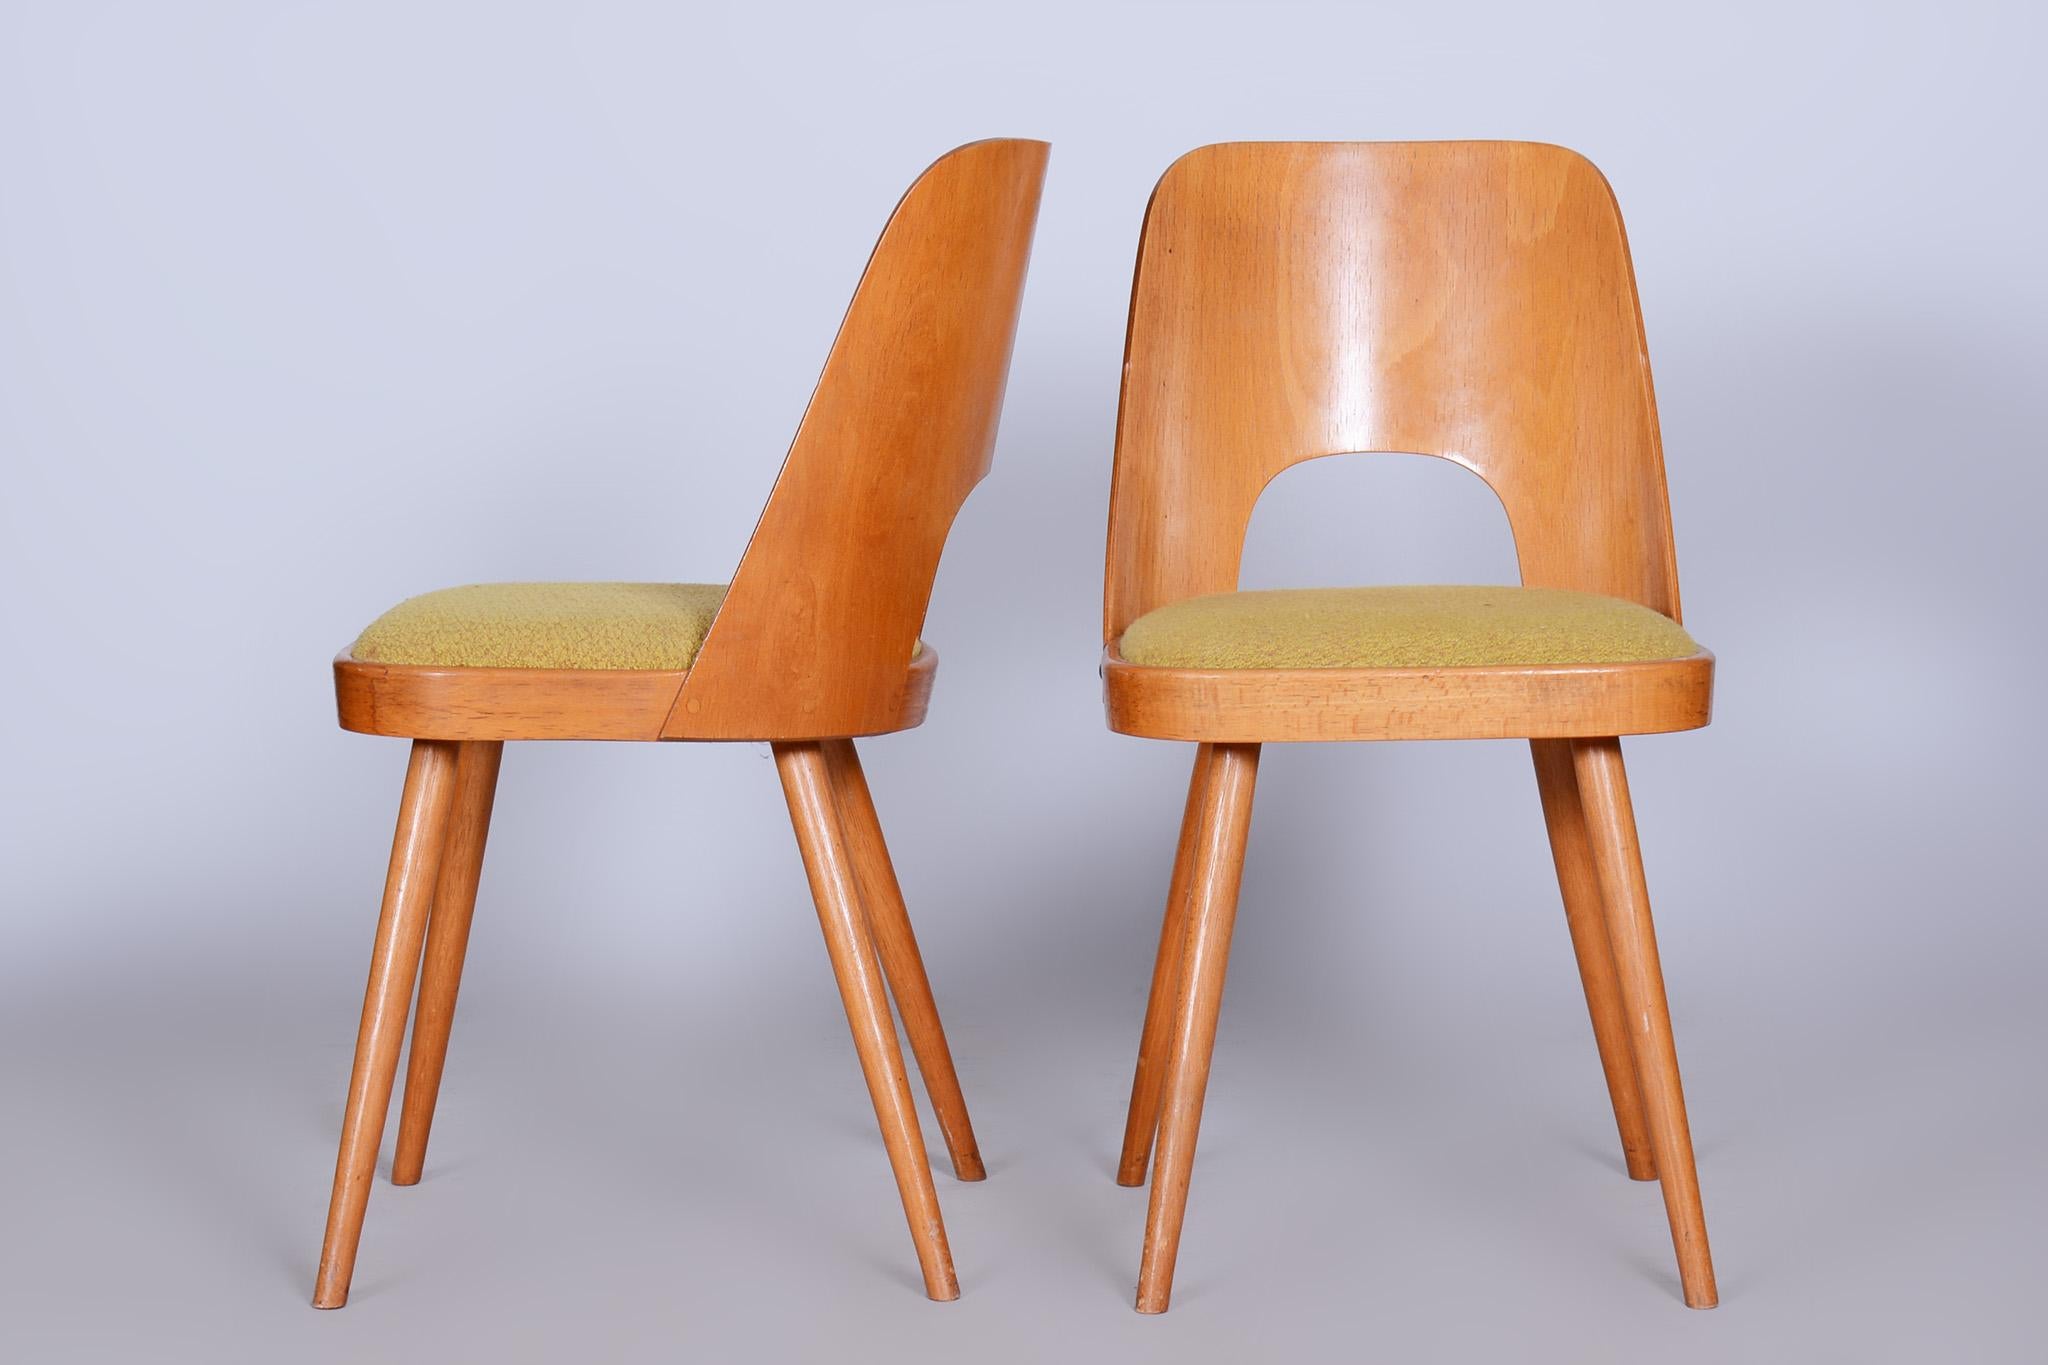 Set of Mid-Century Brown and Yellow Beech Chairs, Oswald Haerdtl, 1950s, Czechia For Sale 1